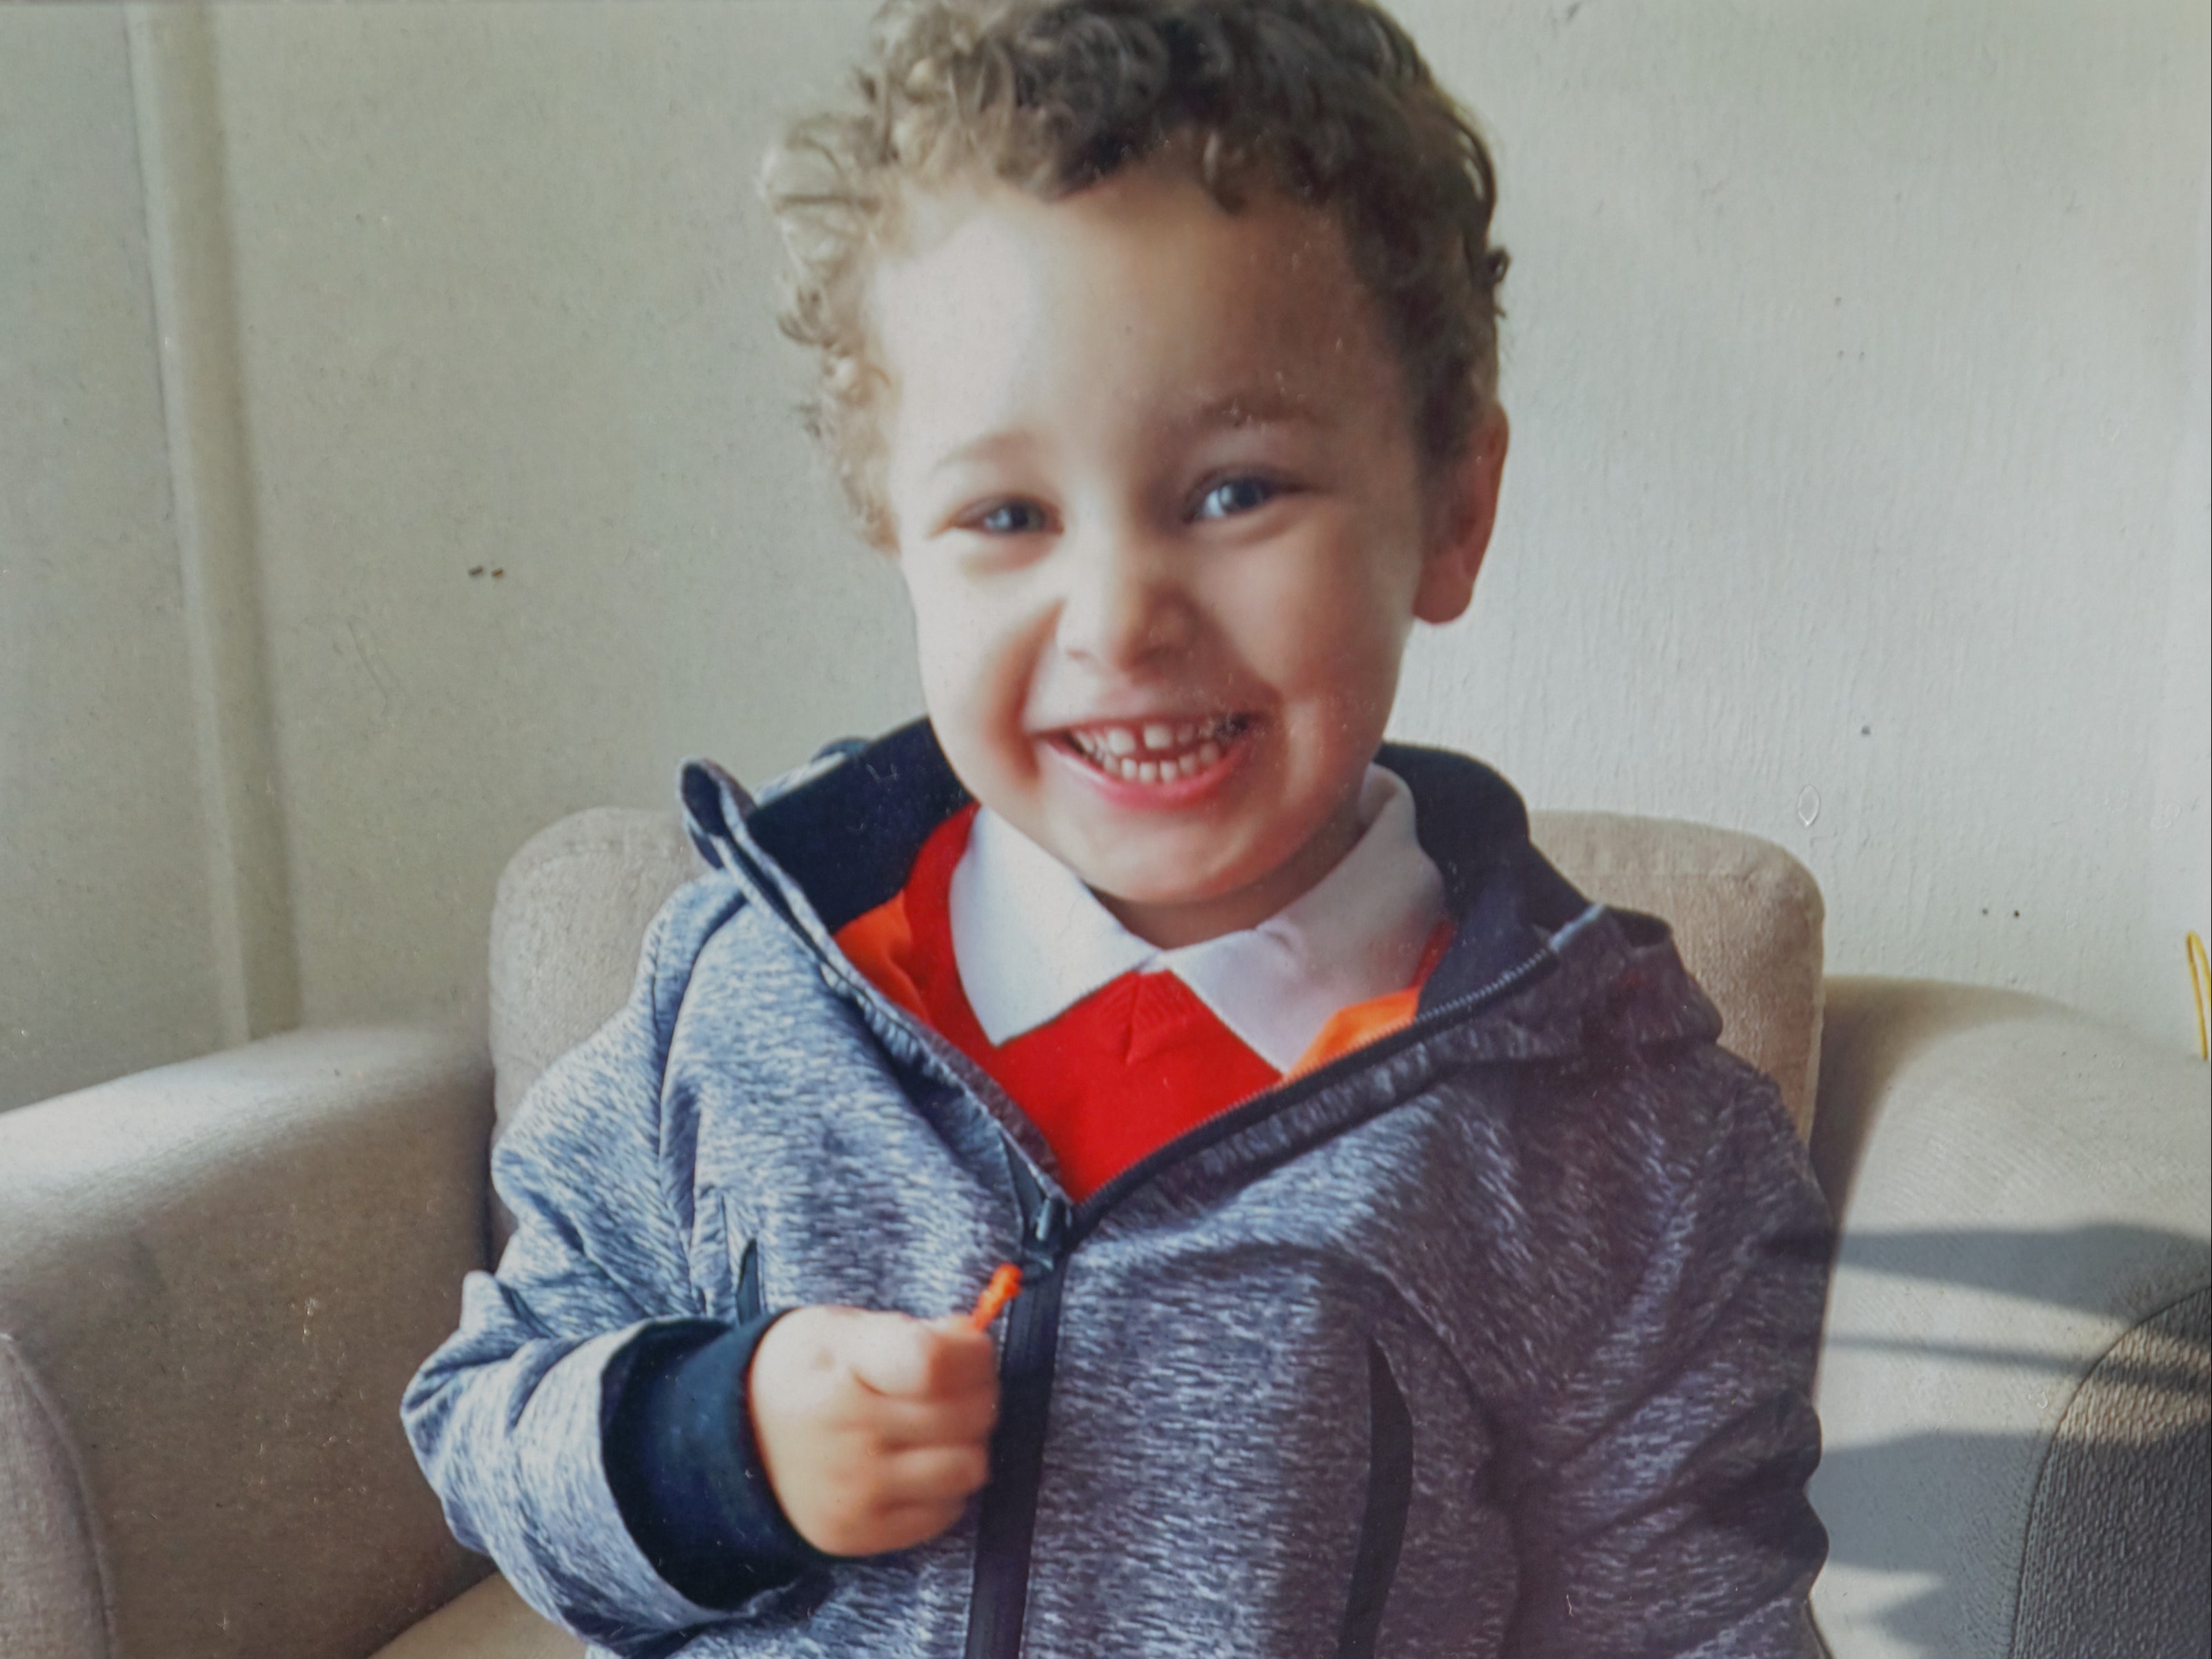 Five-year-old Logan Mwangi was found dumped in the River Ogmore in Bridgend ‘like fly-tipped rubbish’ after suffering 56 injuries, a murder trial has heard